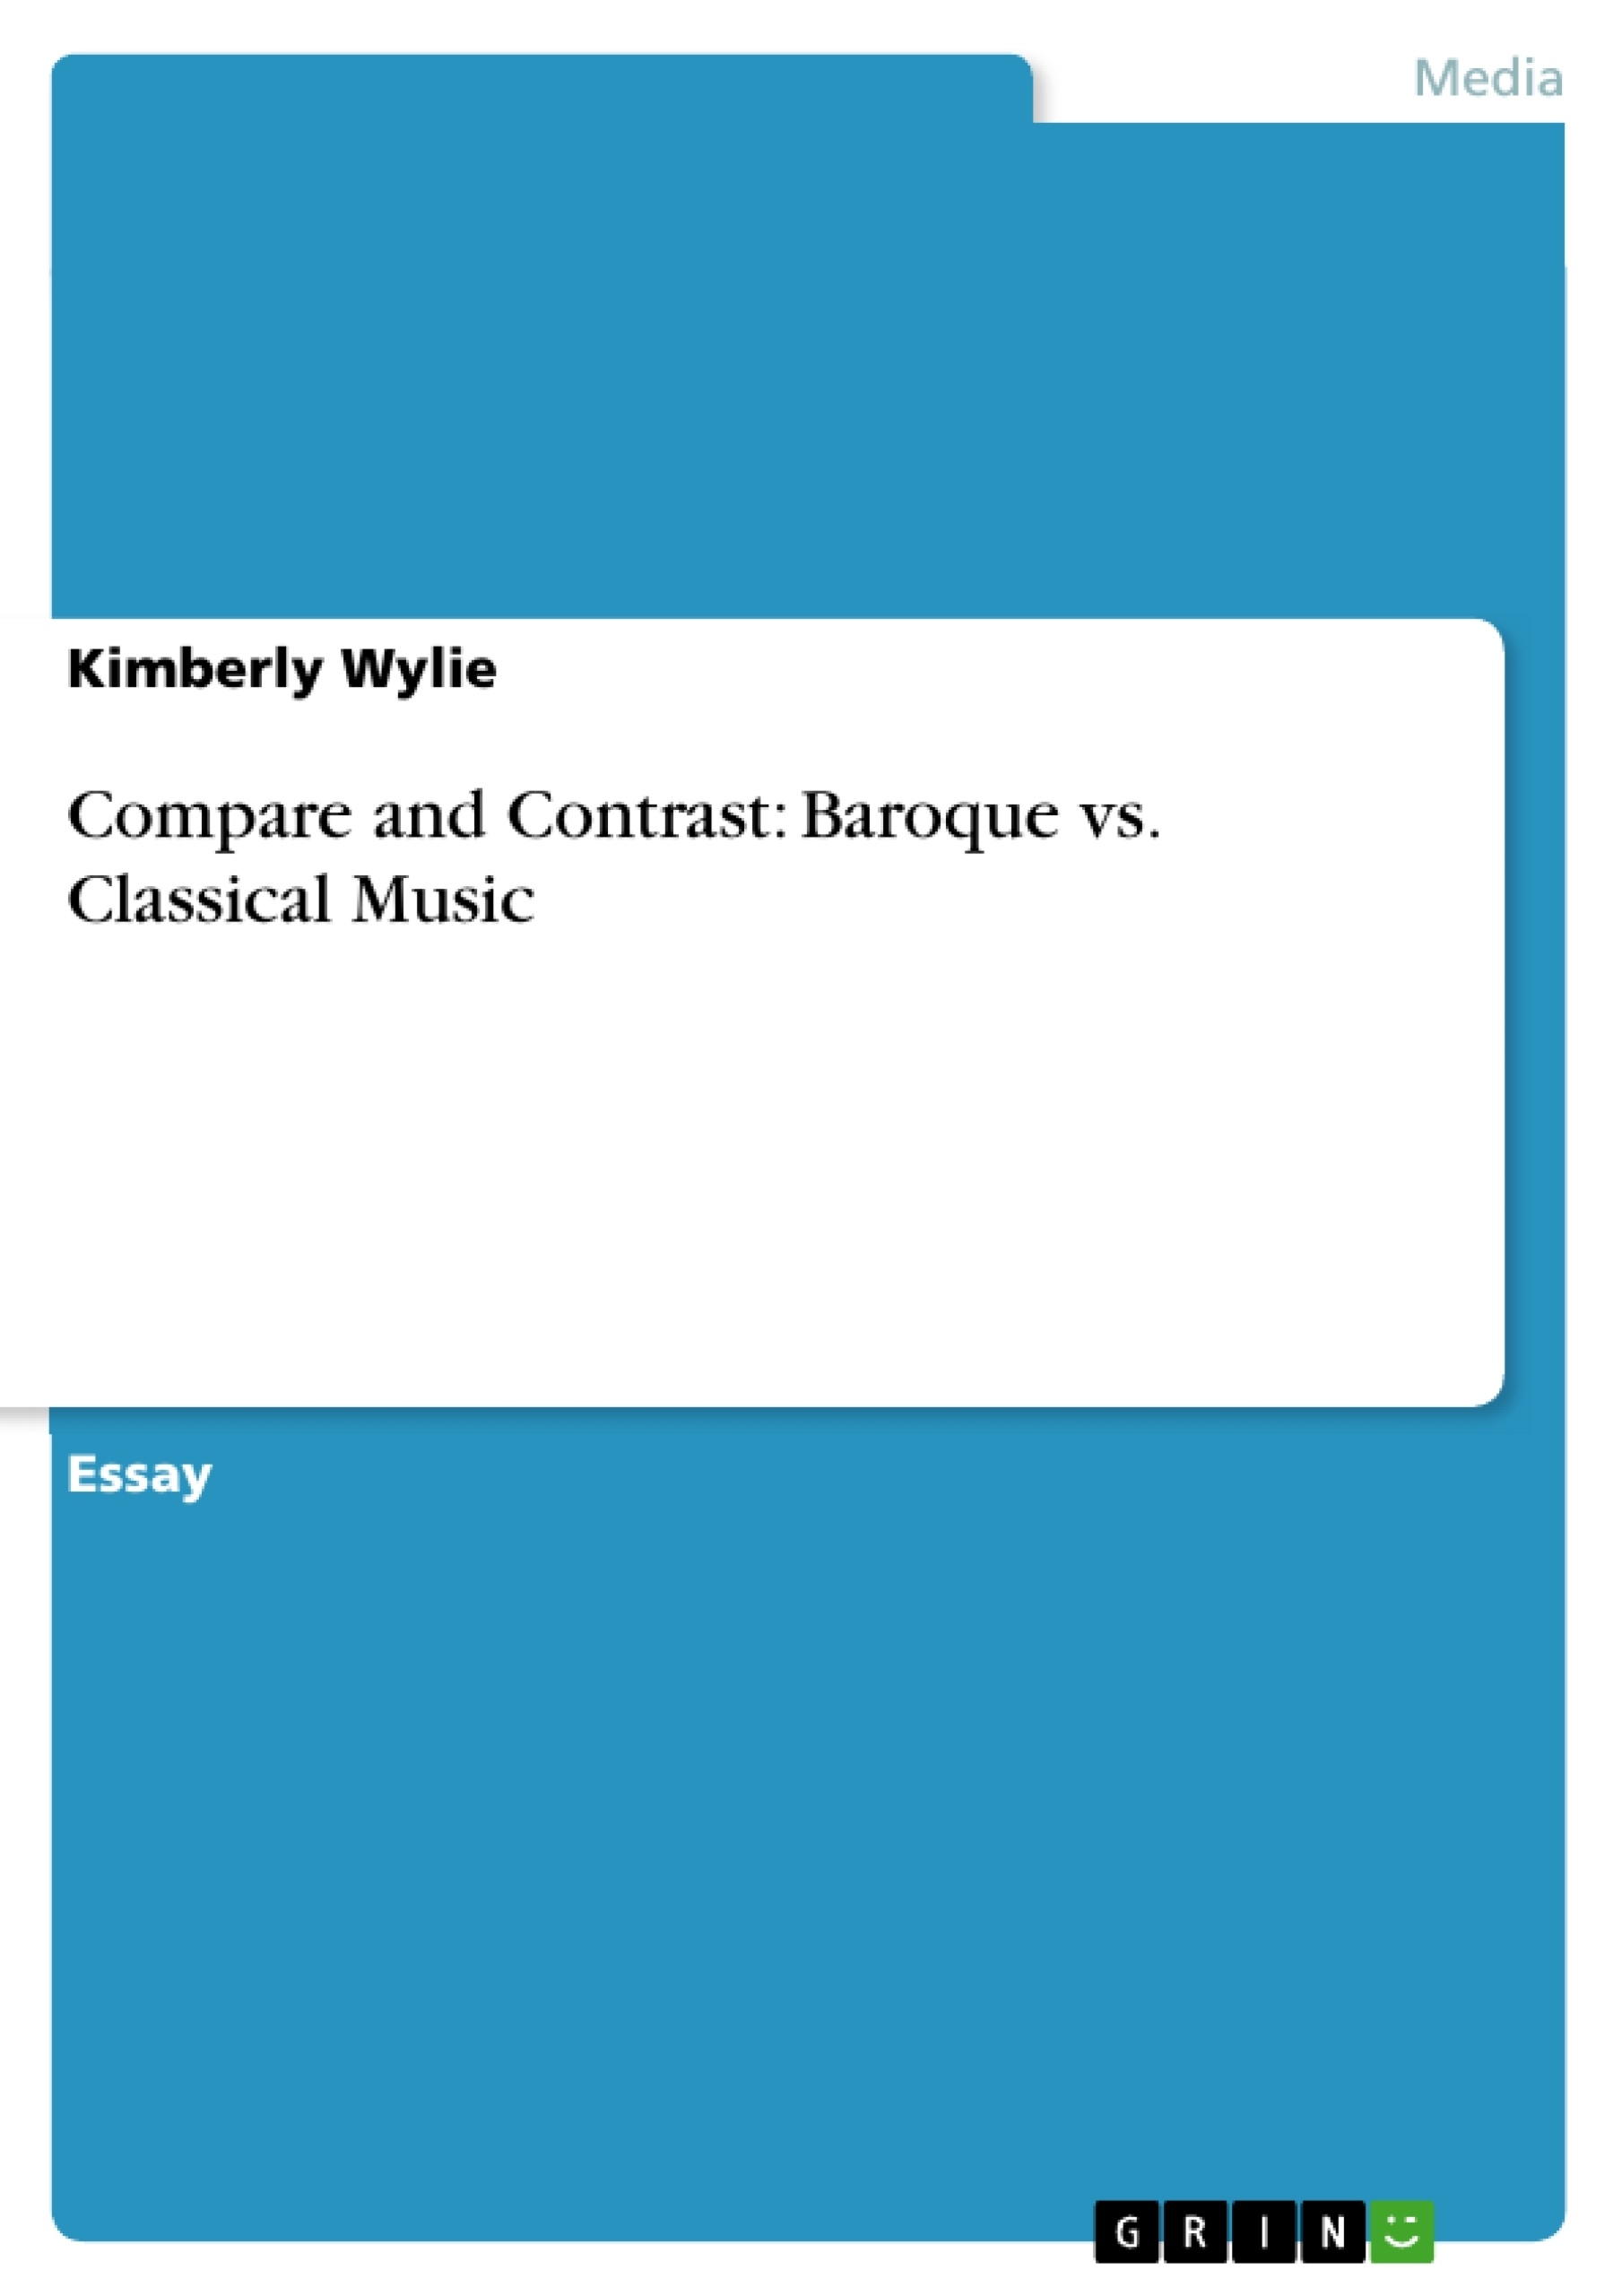 Title: Compare and Contrast: Baroque vs. Classical Music